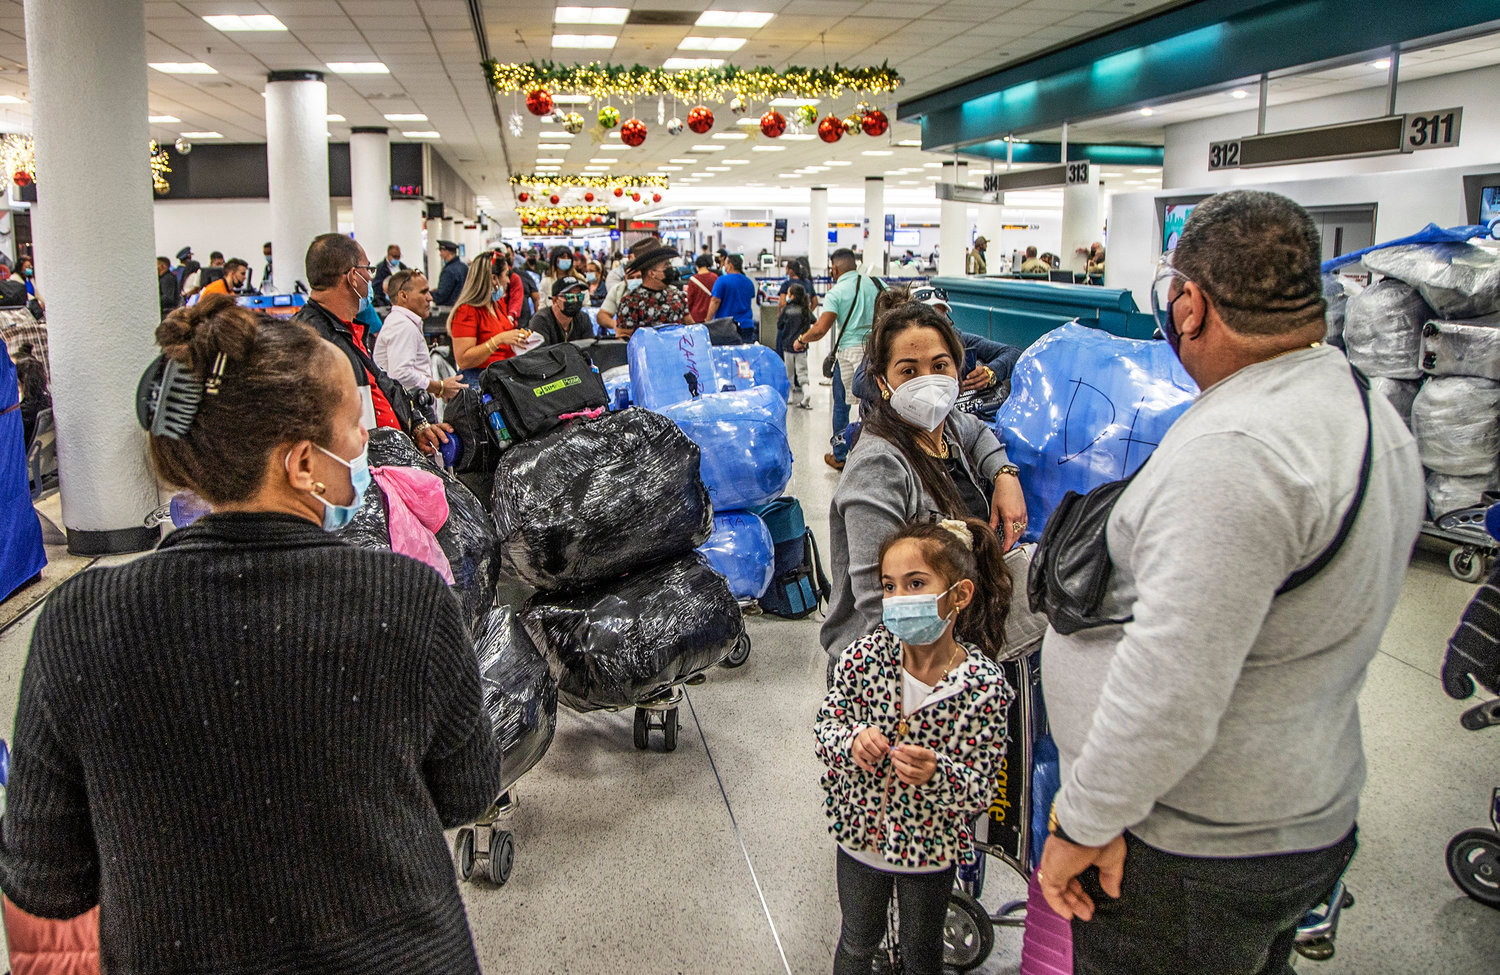 Travelers heading to Cuba are seen at Miami International Airport in December 2021. Cuba is dropping COVID restrictions for international travelers despite new surges around the world. Tourism to the Caribbean island took a big hit during the pandemic. (Pedro Portal/Miami Herald/TNS)